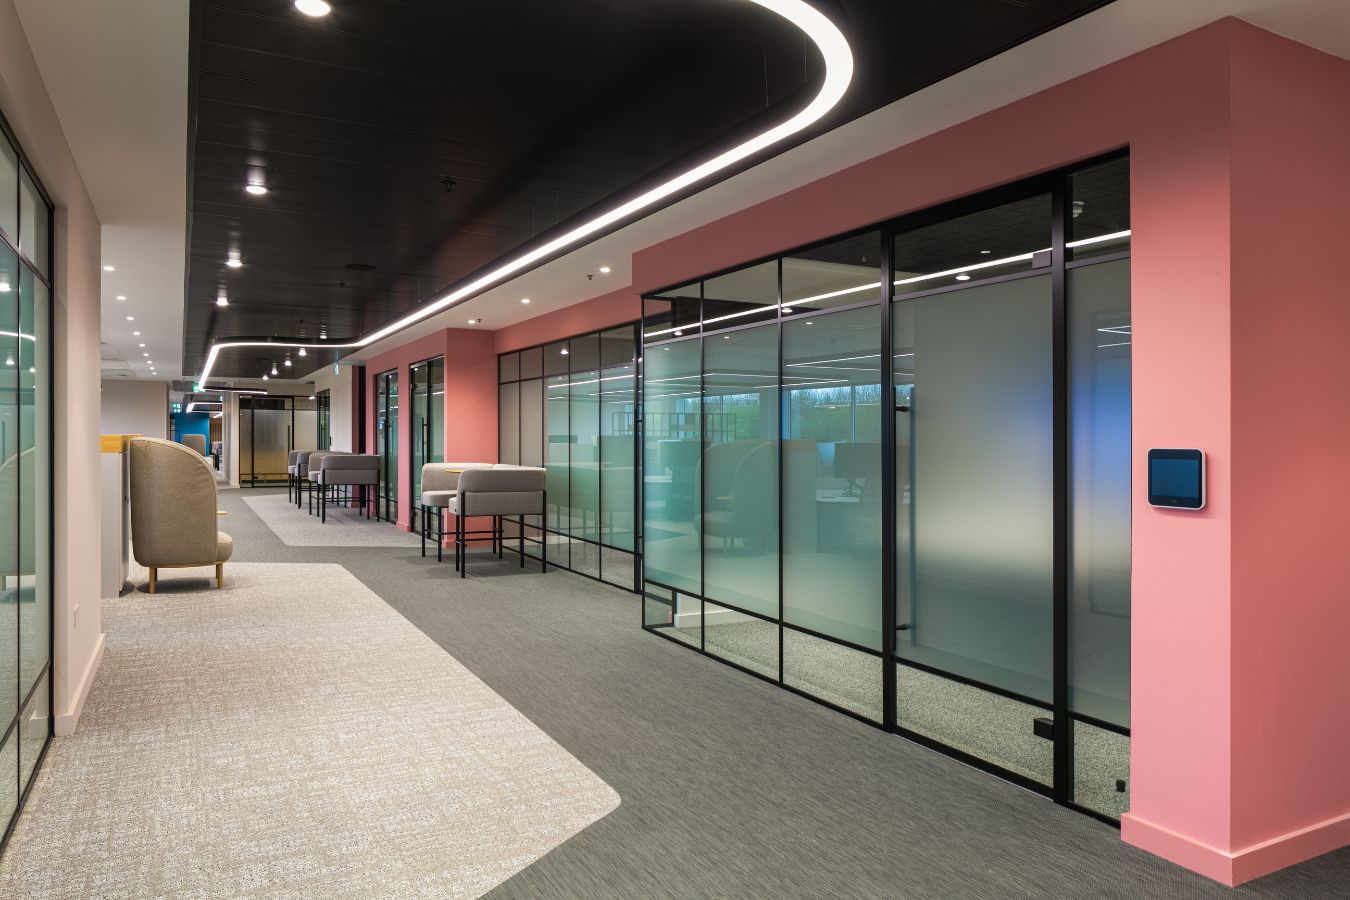 Office partitions in a modern, colourful, well-lit workspace with bespoke lighting solutions